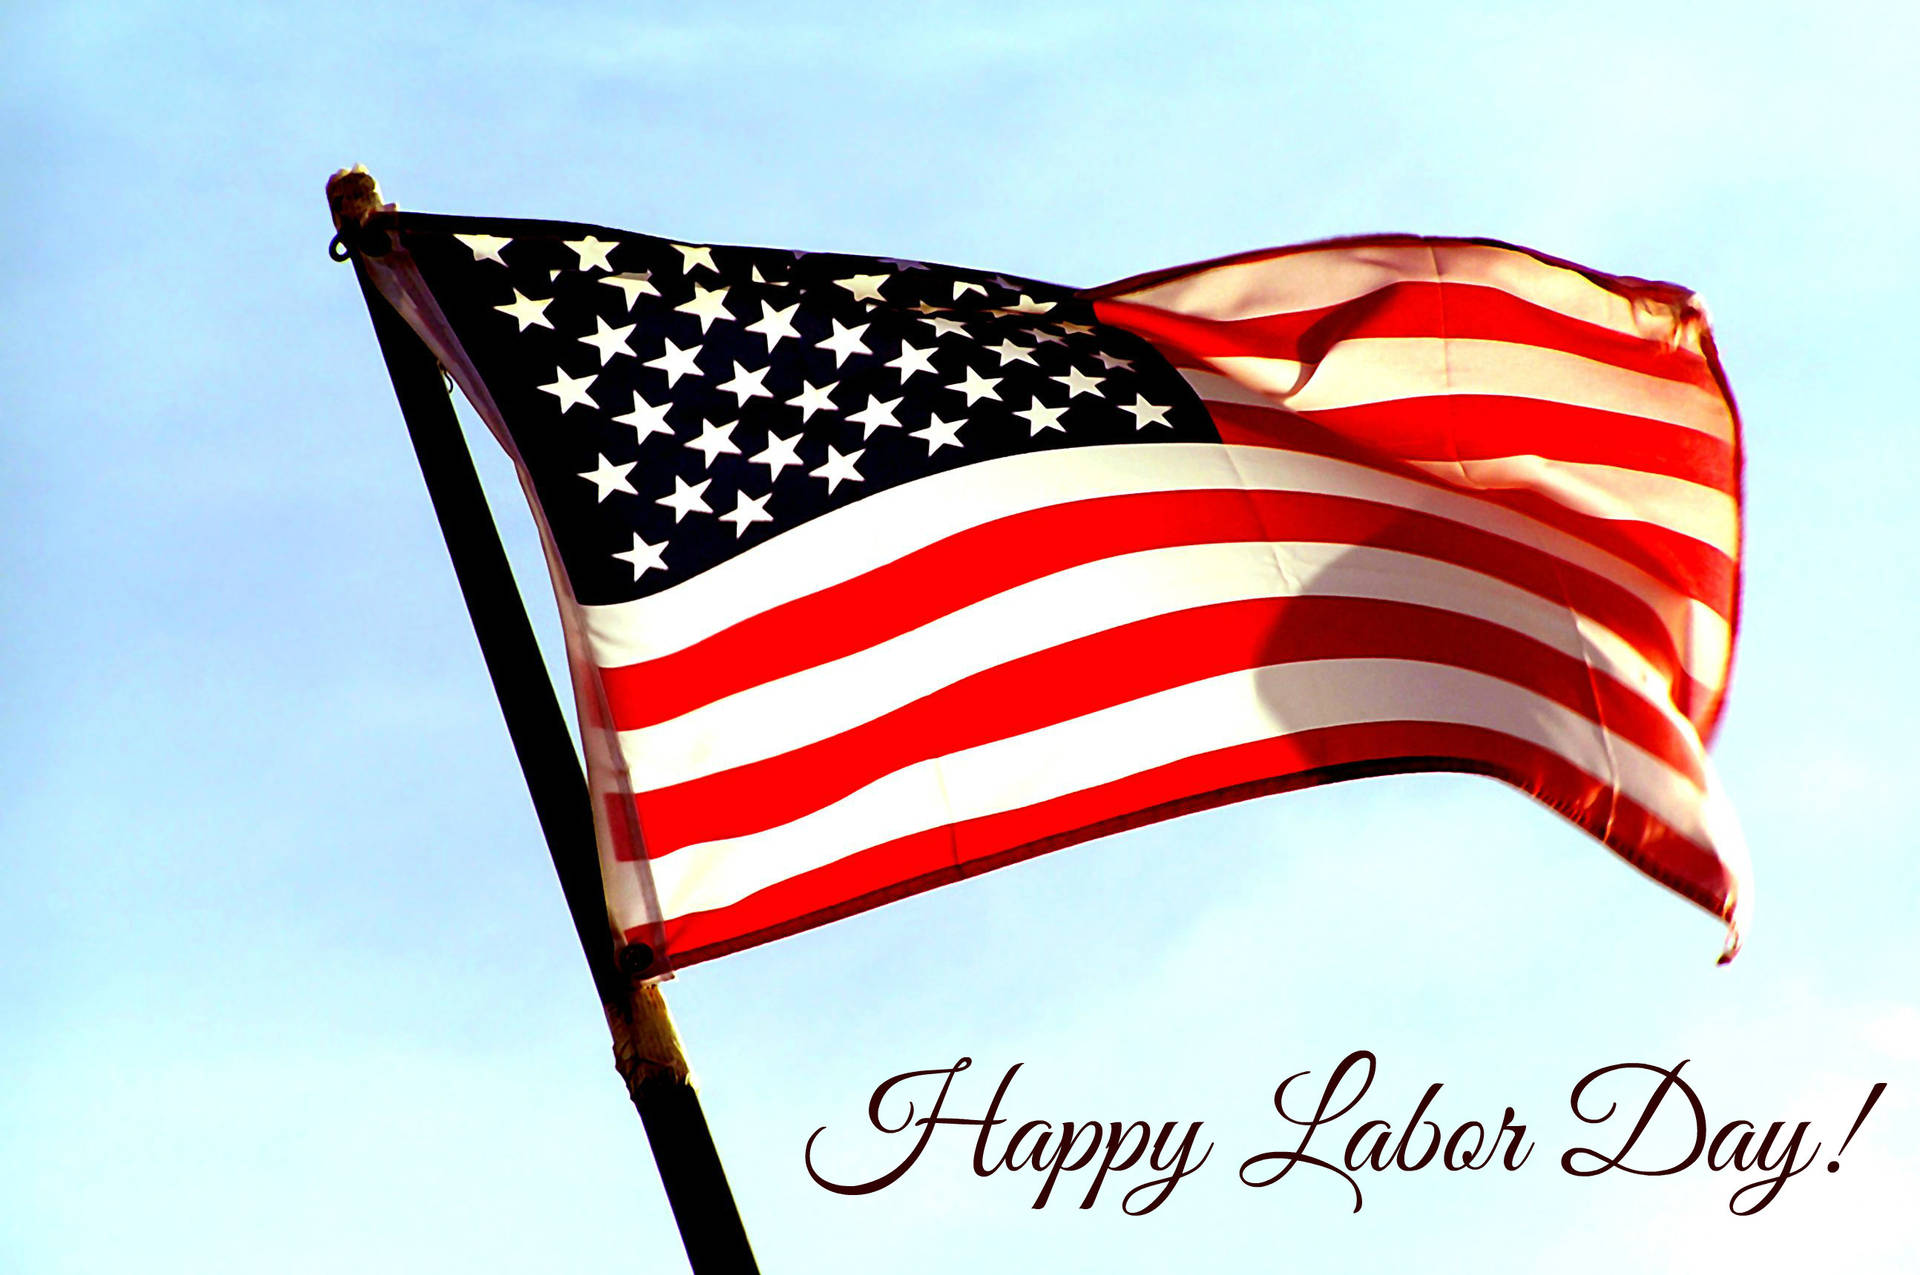 American Flag With Labor Day Greeting Background